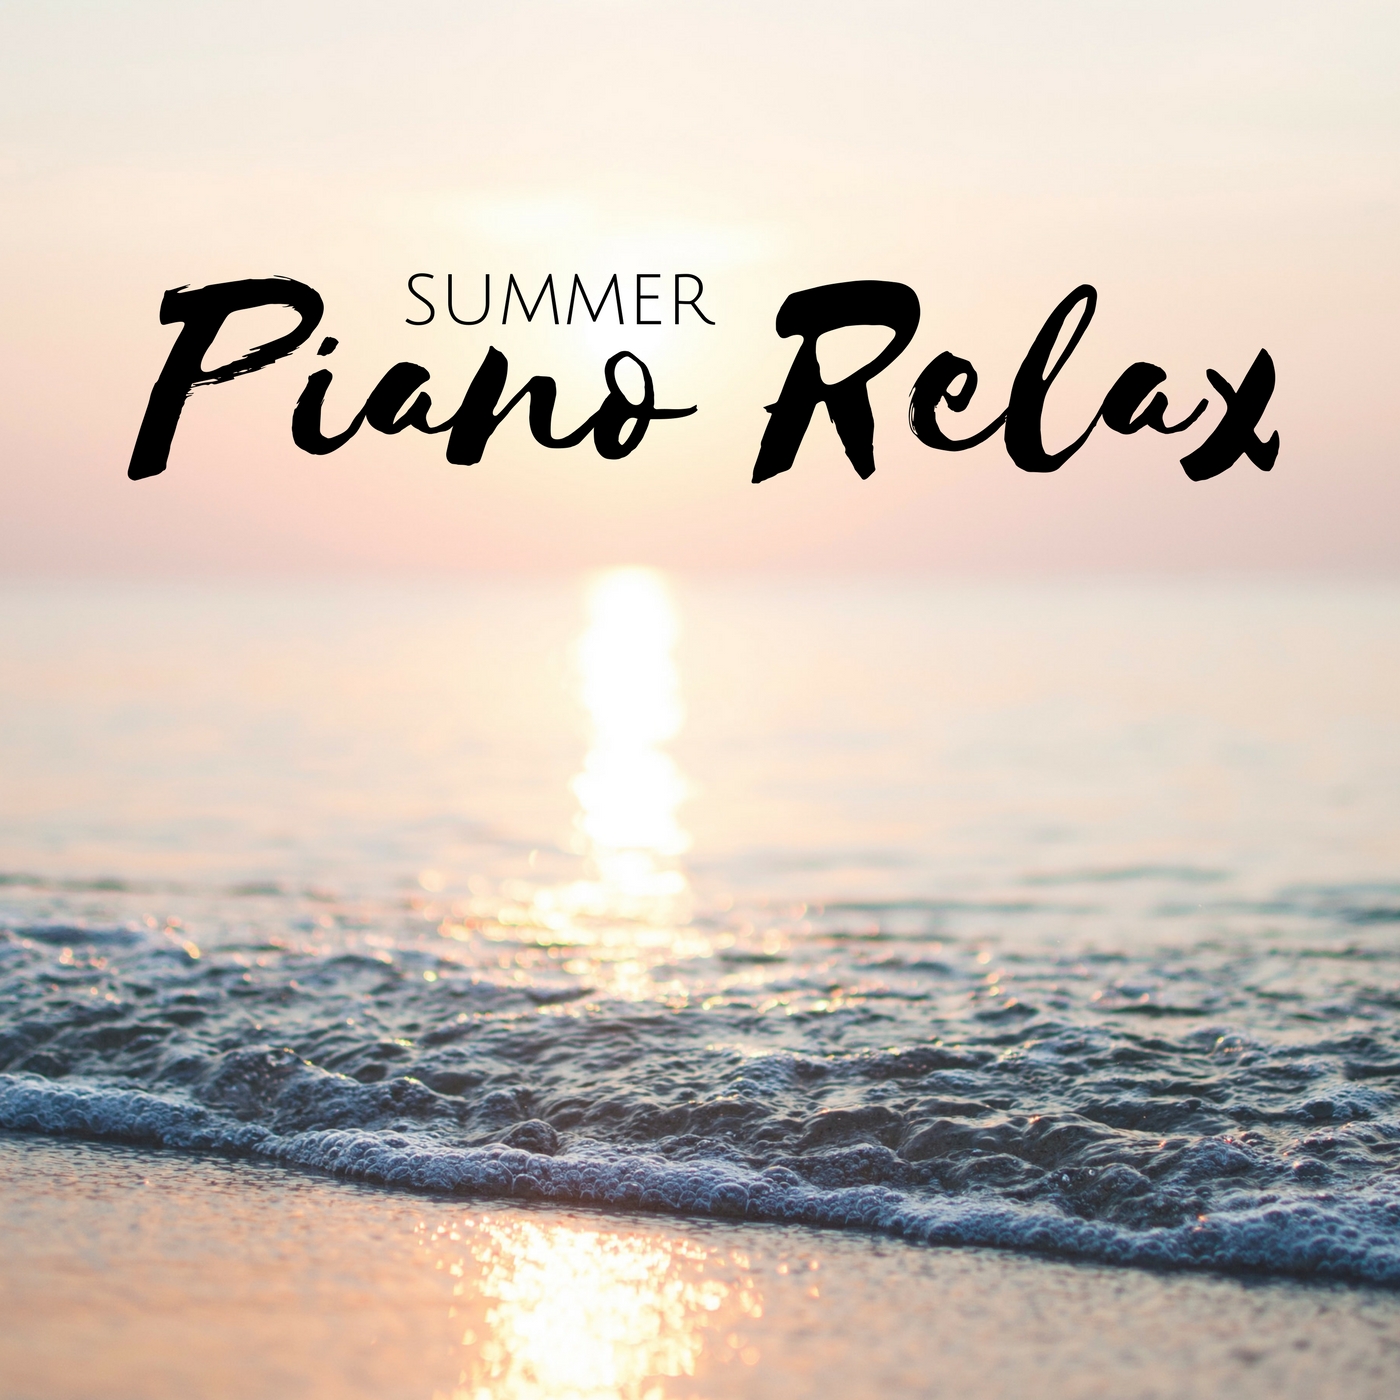 Summer Piano Relax